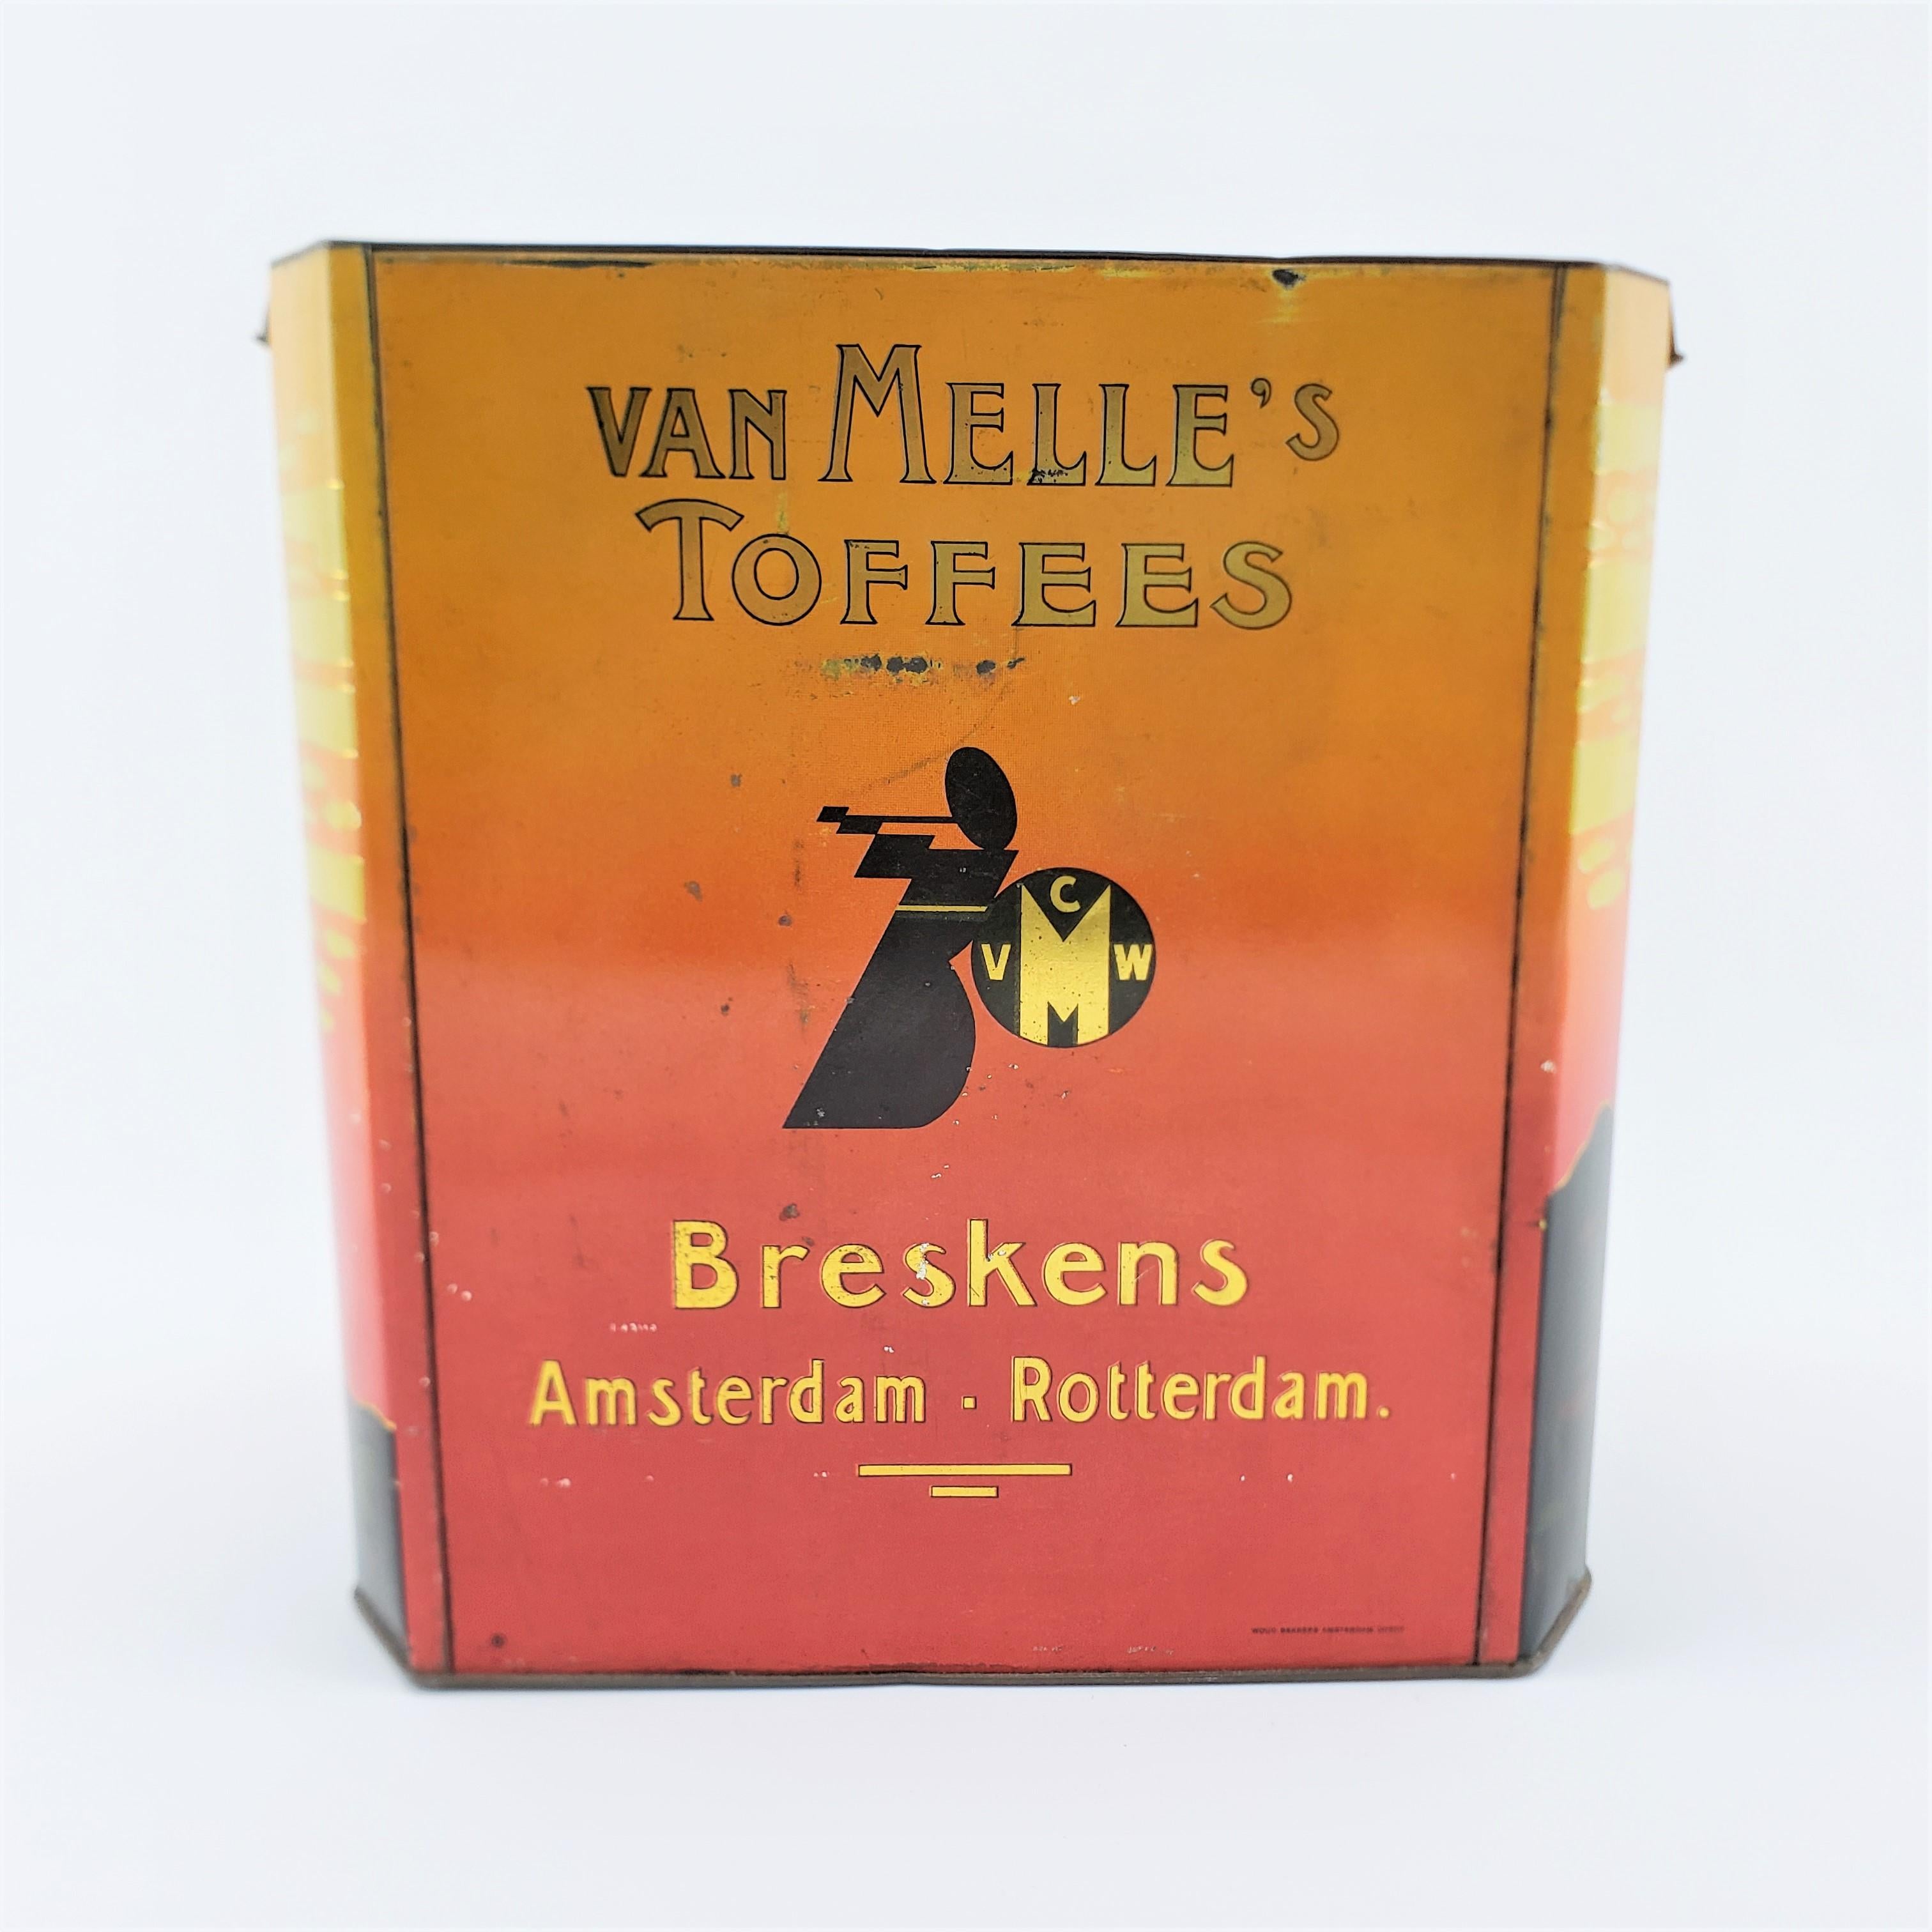 Pressed Antique Van Melles Large Toffee Store Display Advertising Tin with Arabic Motif For Sale